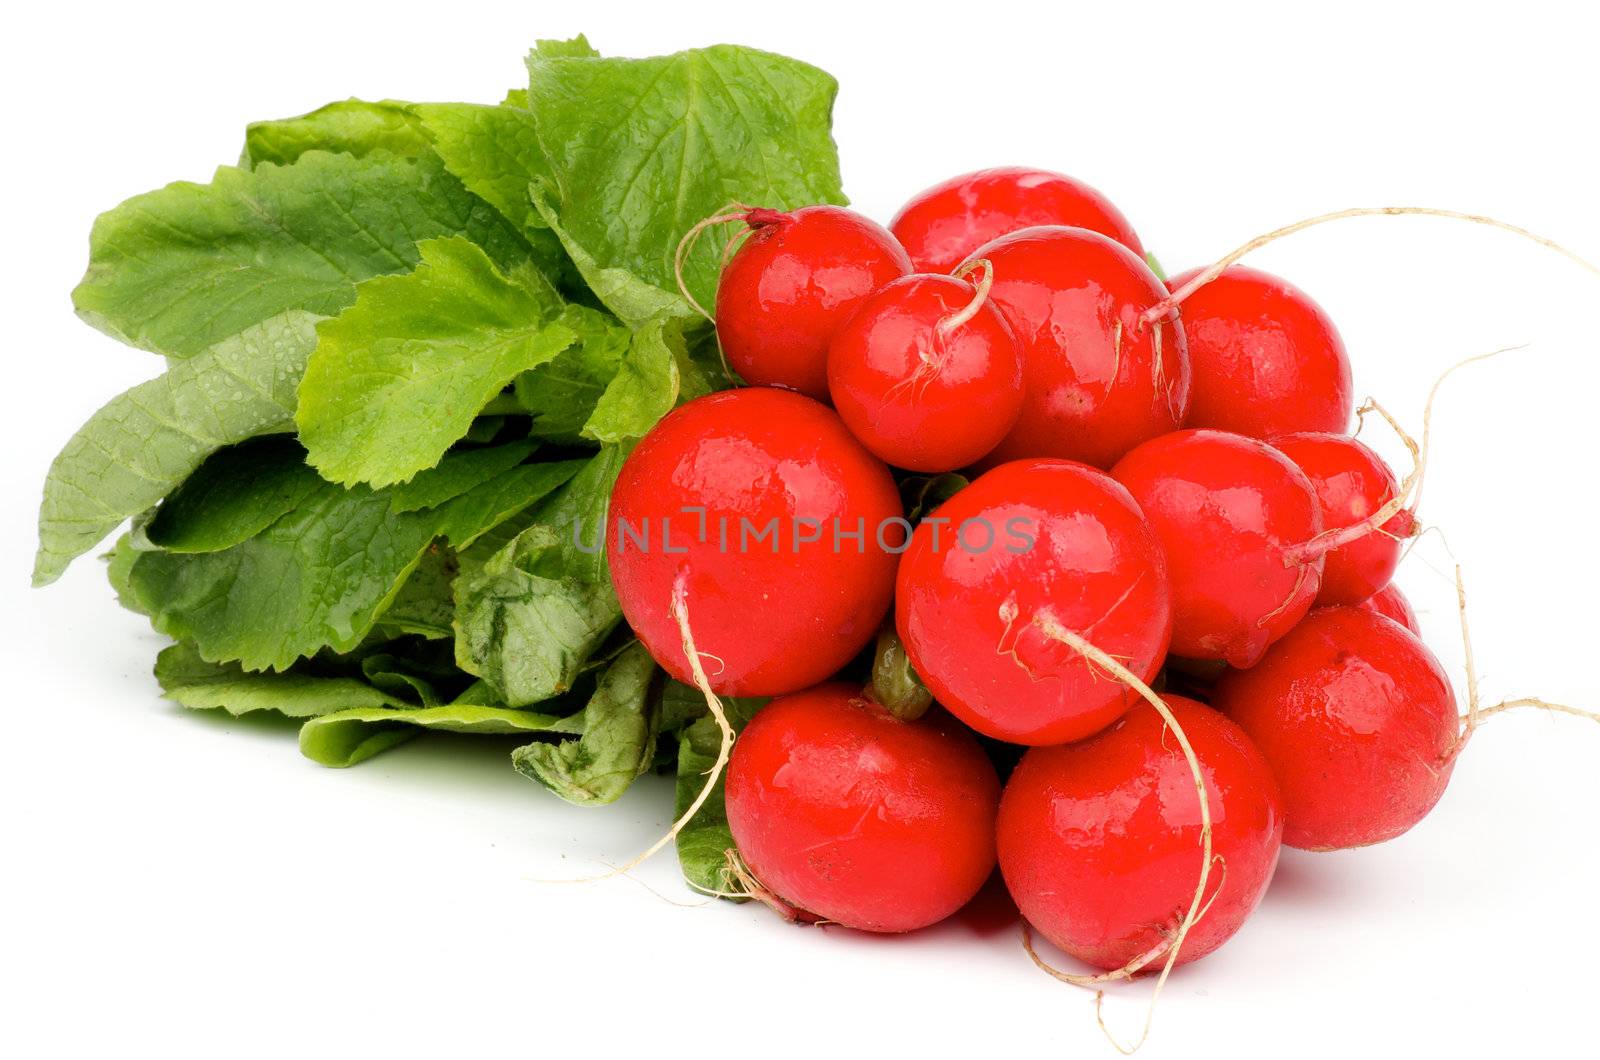 Bunch of Perfect Fresh Raw Radishes with Stems and Leafs isolated on white background